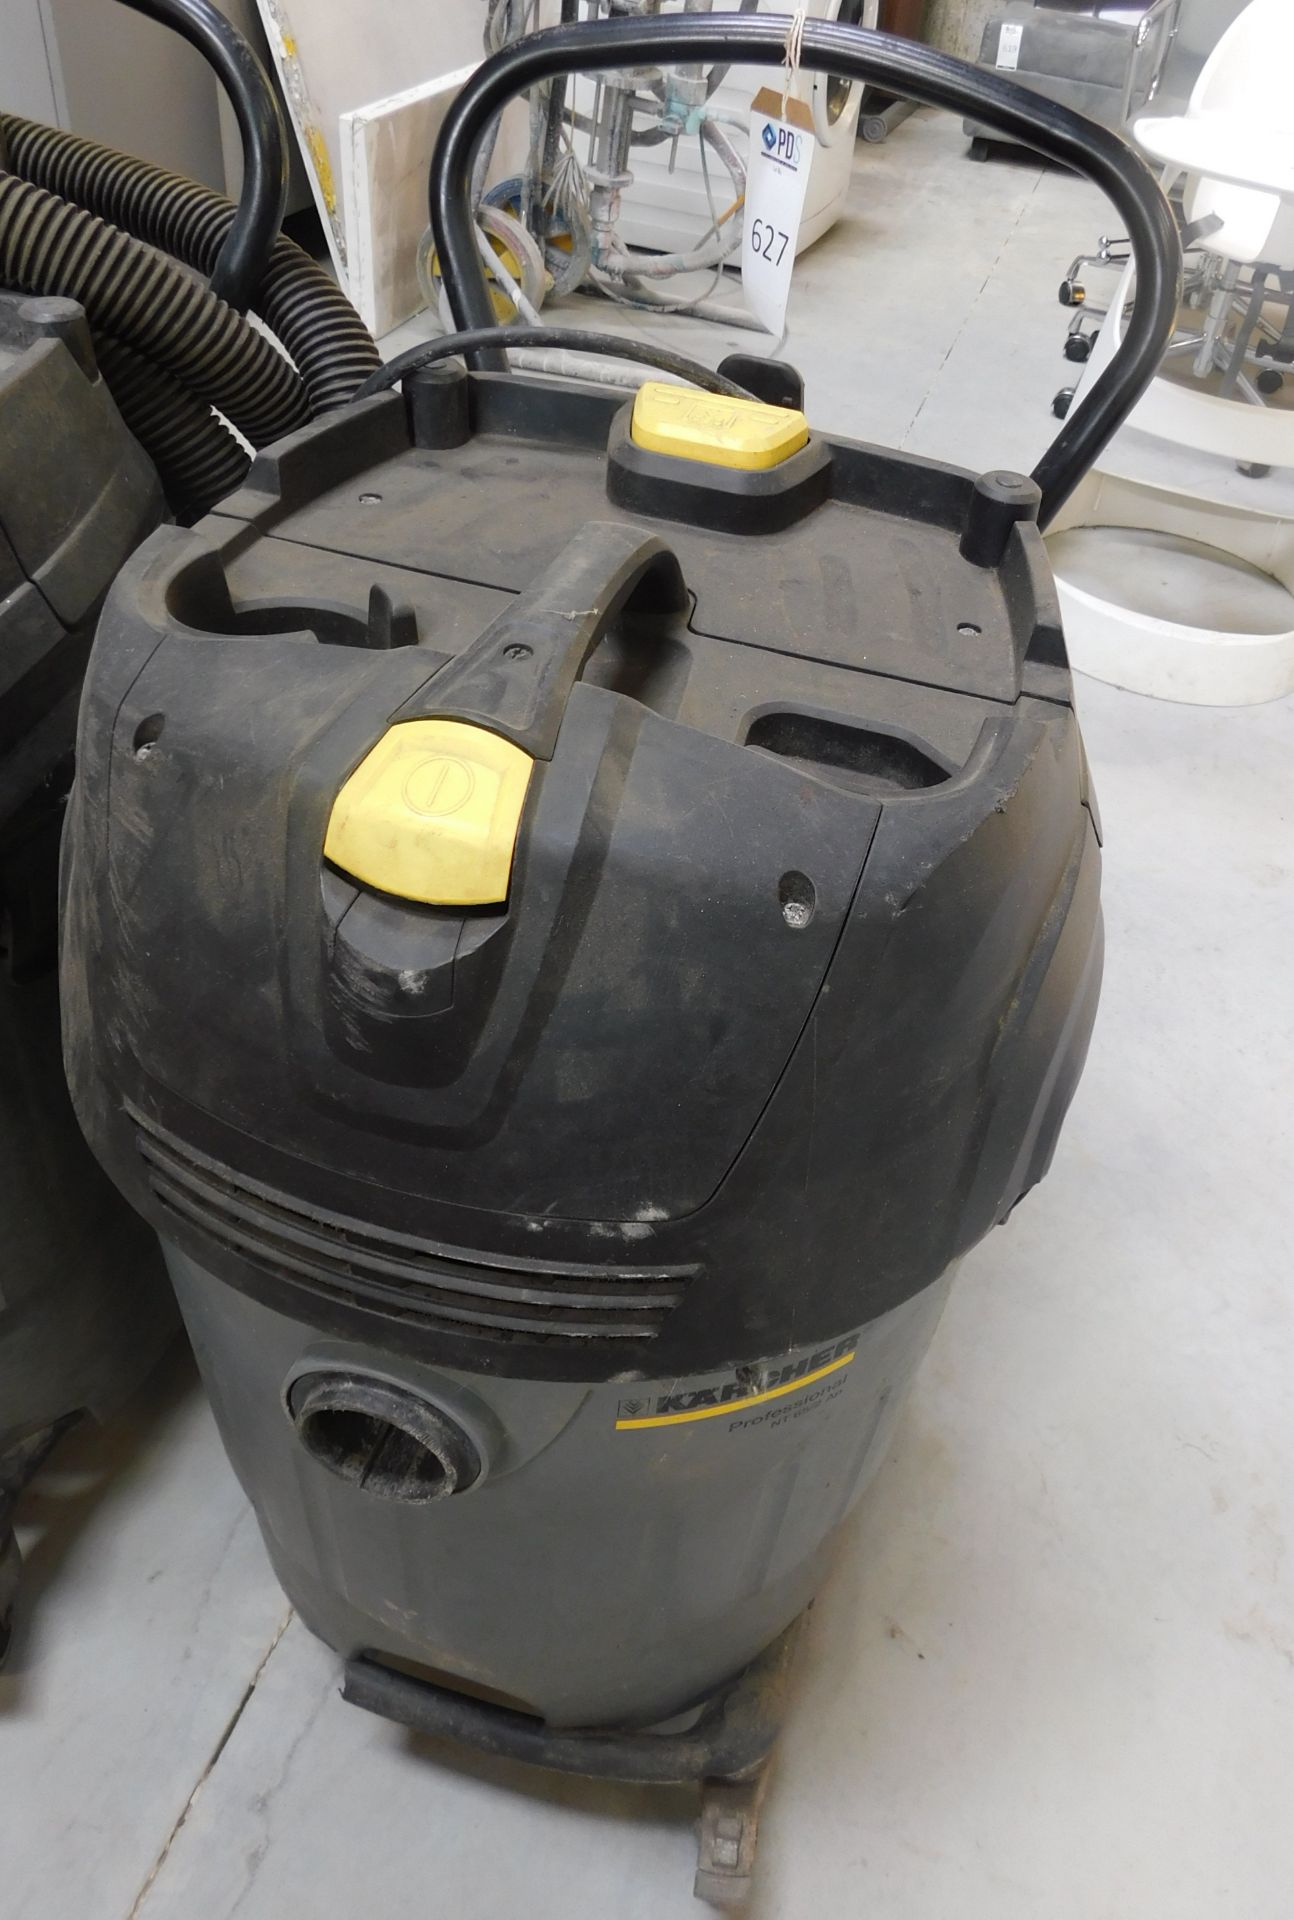 Karcher Professional NT65/2 Wet & Dry Vacuum Cleaner, Serial No. 011671 Missing front wheel (Located